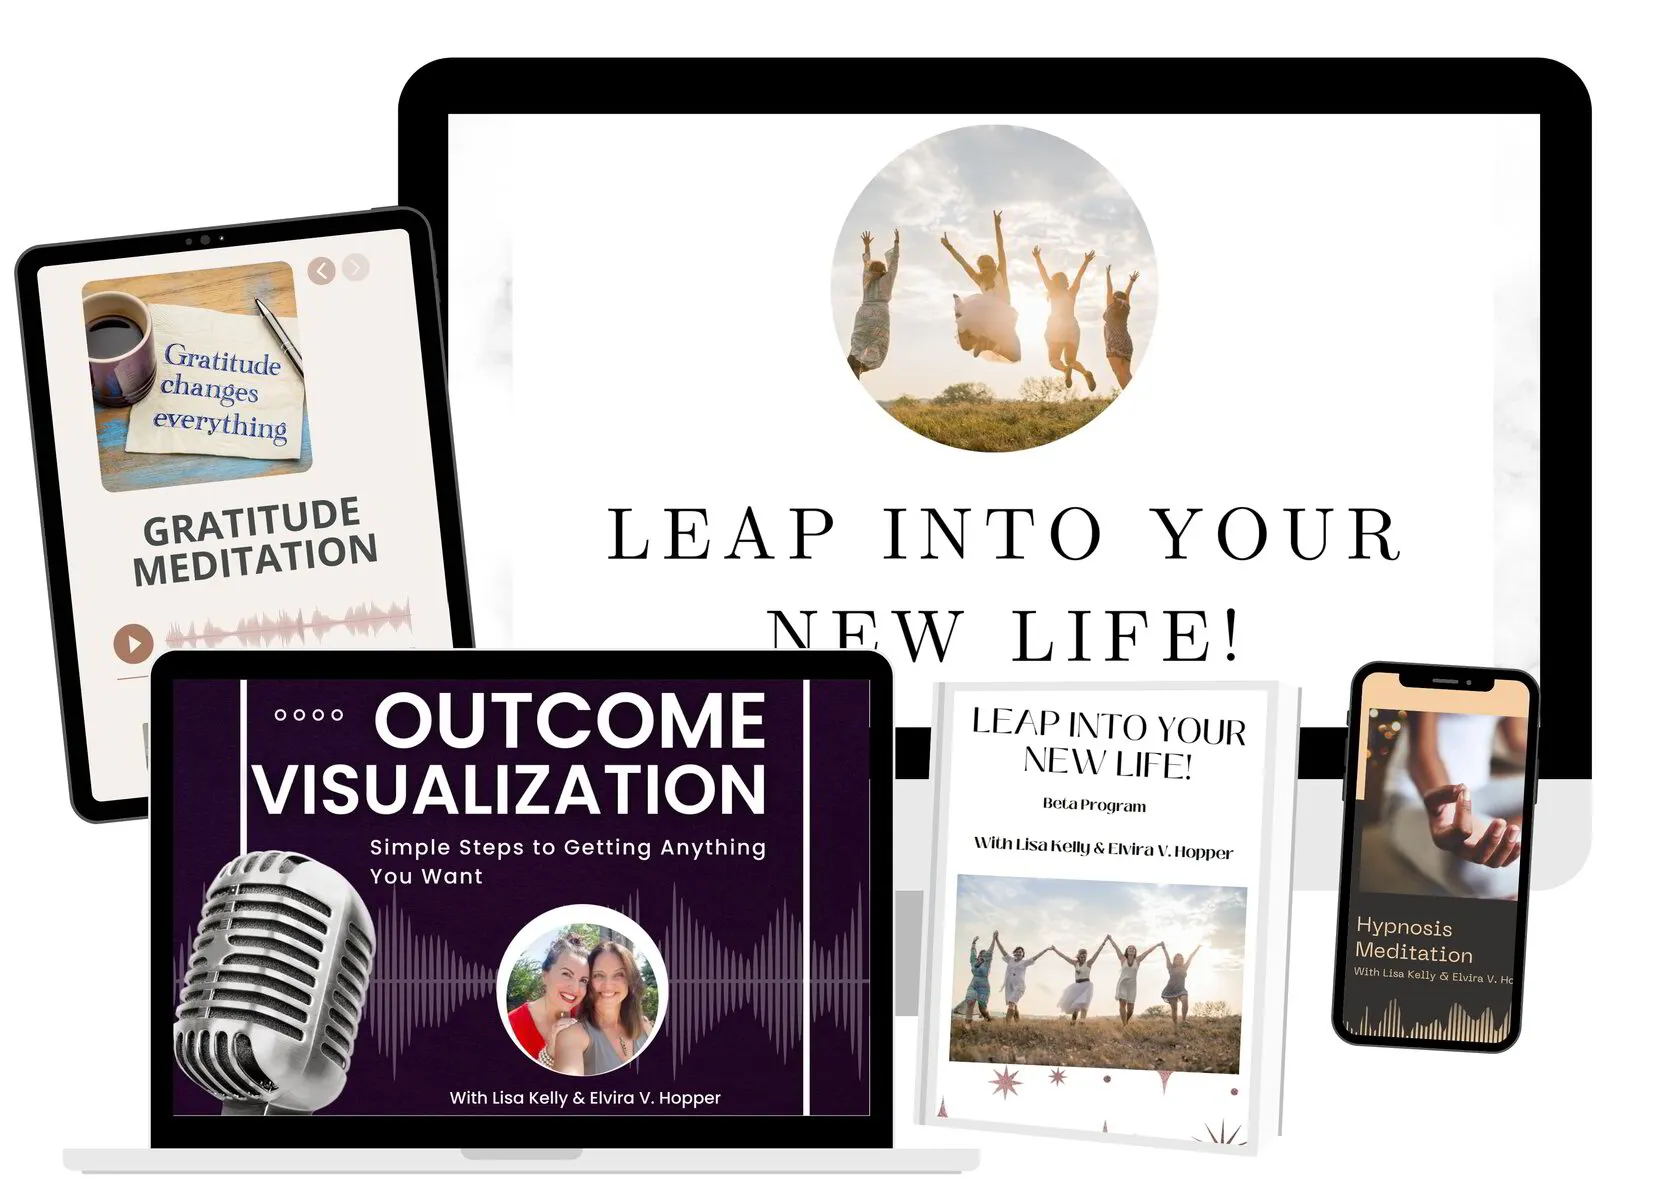 Leap Into Your New Life - $1199 USD One-Time Only